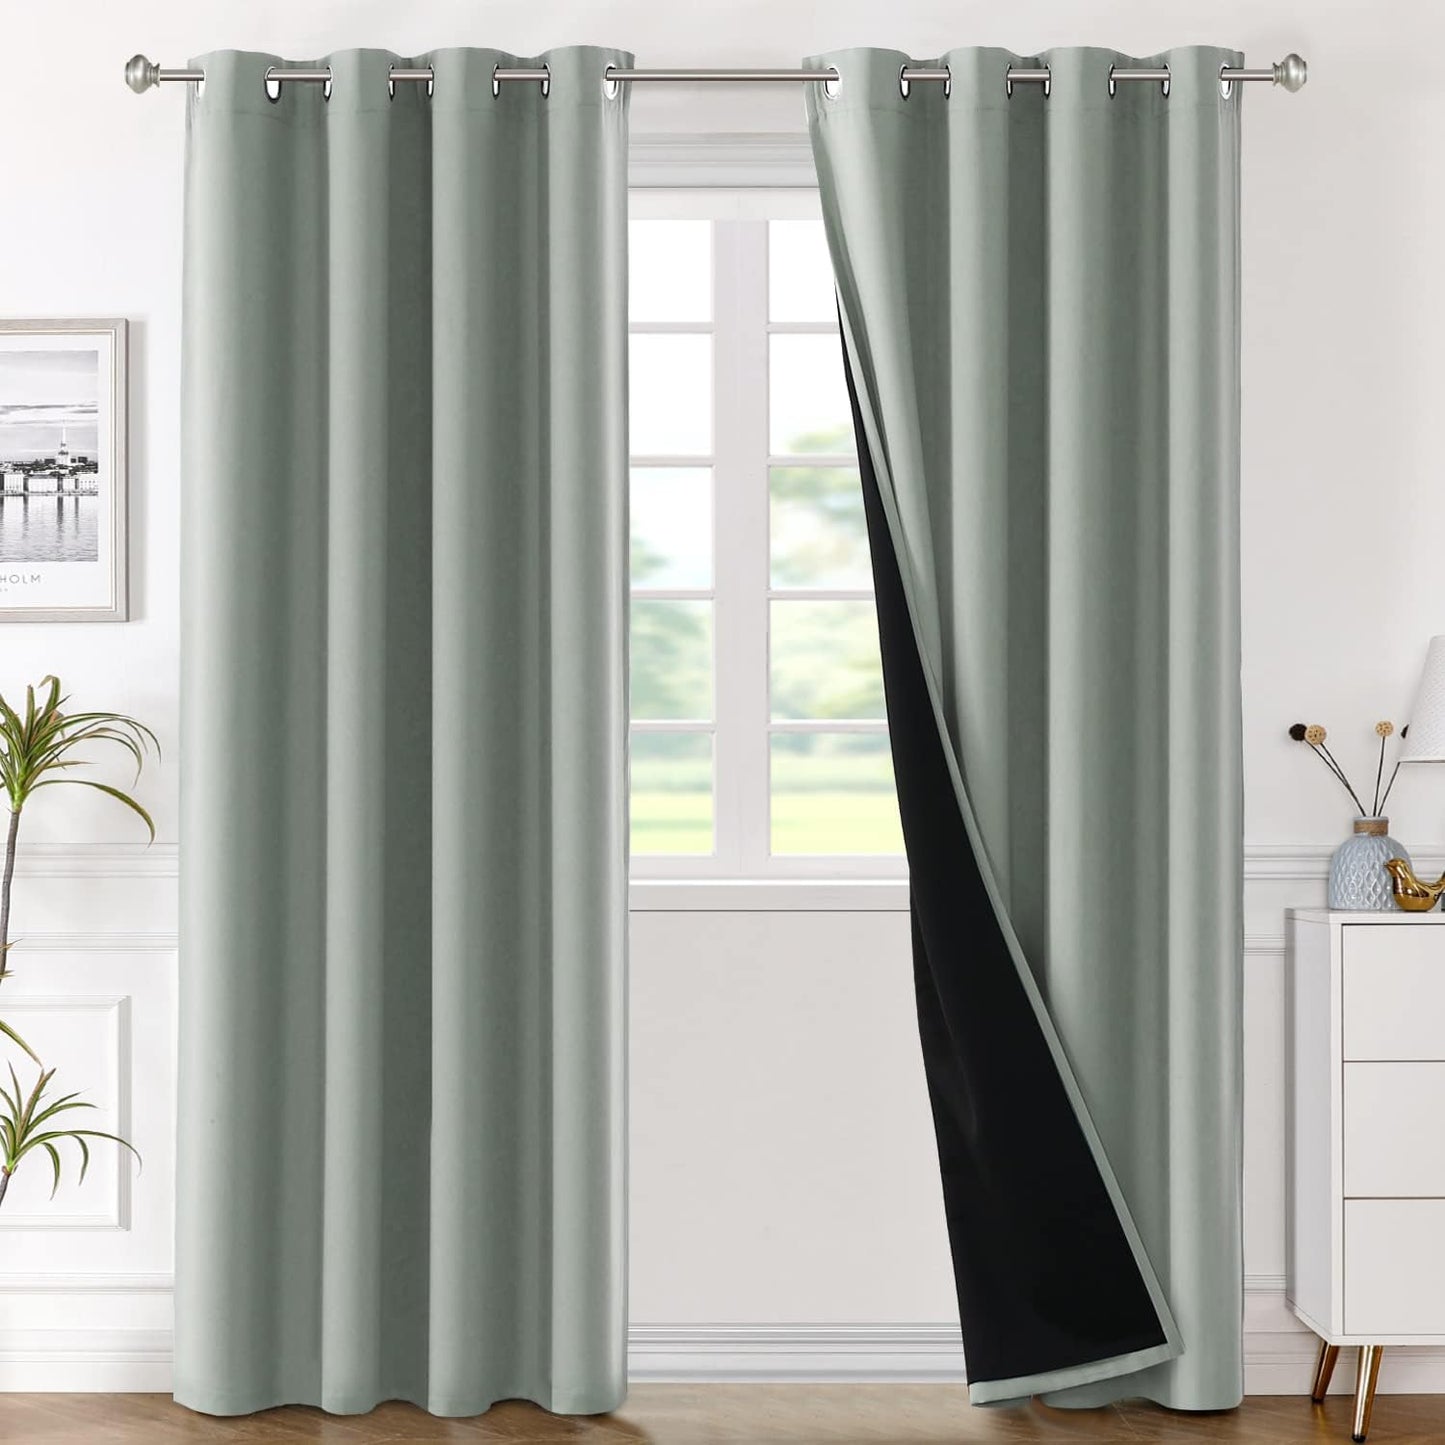 H.VERSAILTEX Blackout Curtains with Liner Backing, Thermal Insulated Curtains for Living Room, Noise Reducing Drapes, White, 52 Inches Wide X 96 Inches Long per Panel, Set of 2 Panels  H.VERSAILTEX Sage 52"W X 84"L 